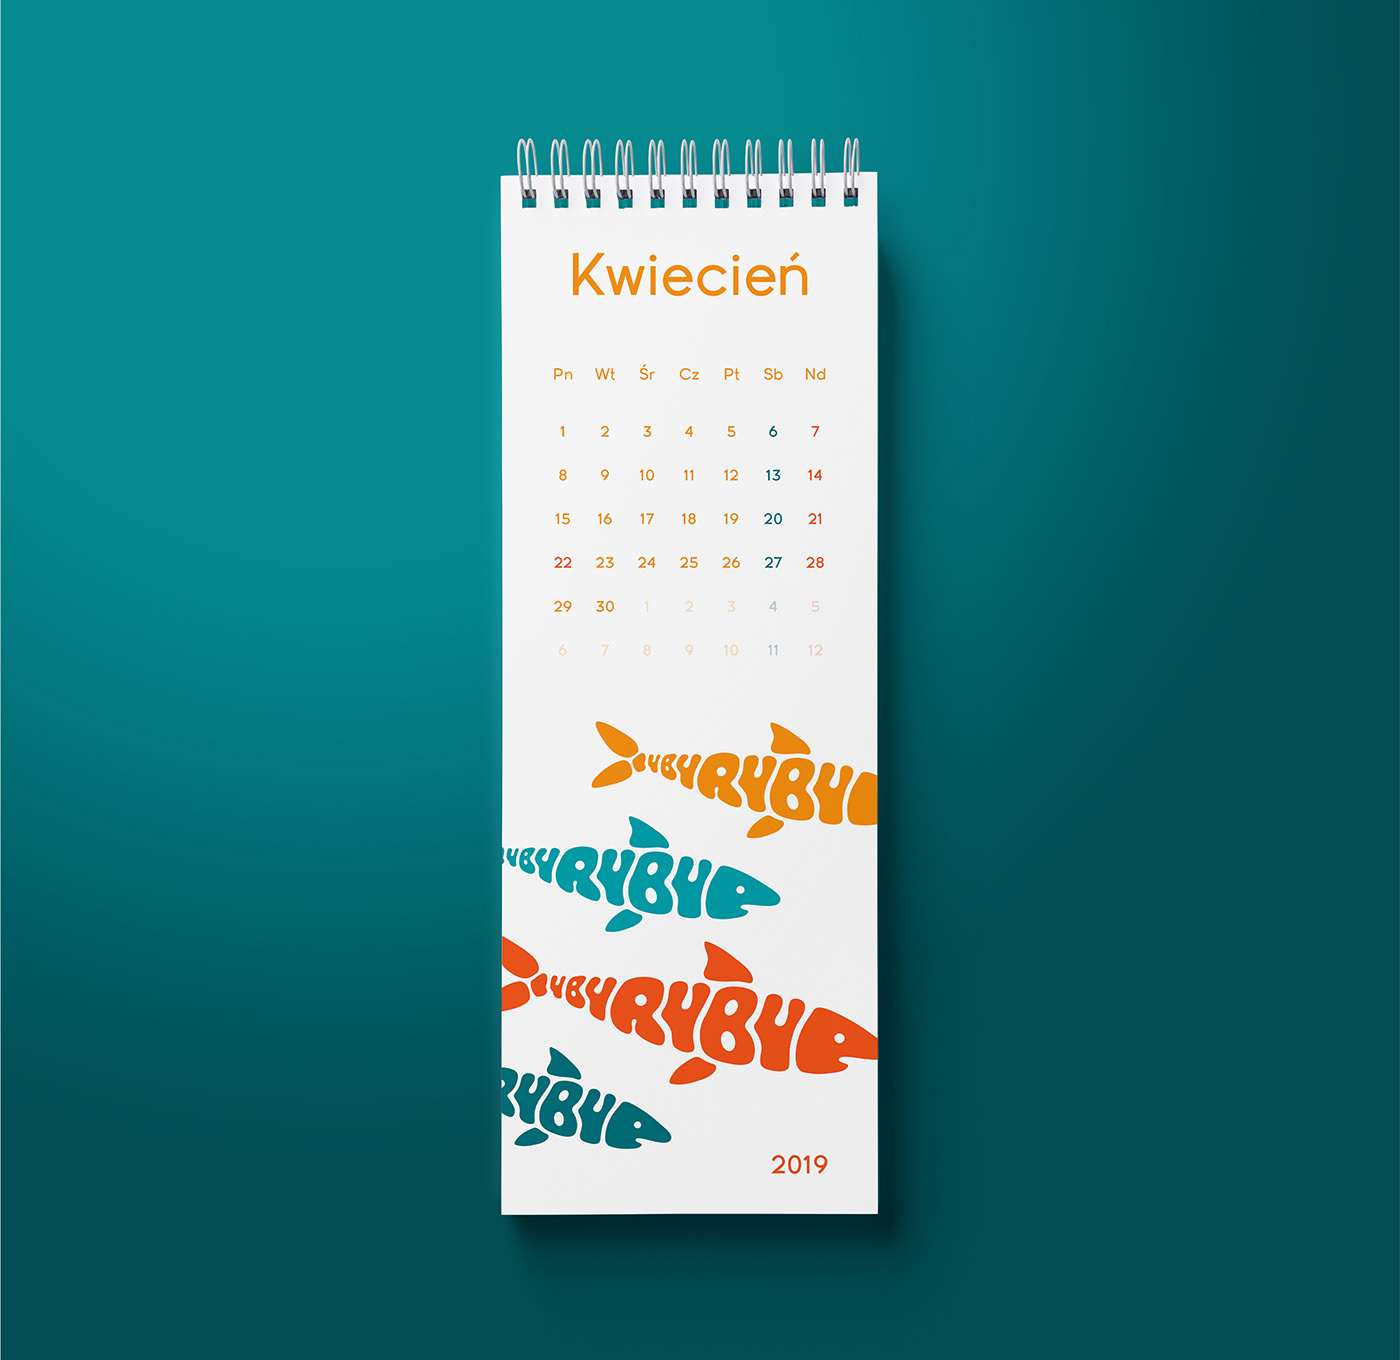 graphicdesign kalendarz calendar typographic illustrations color edytorial Layout student project